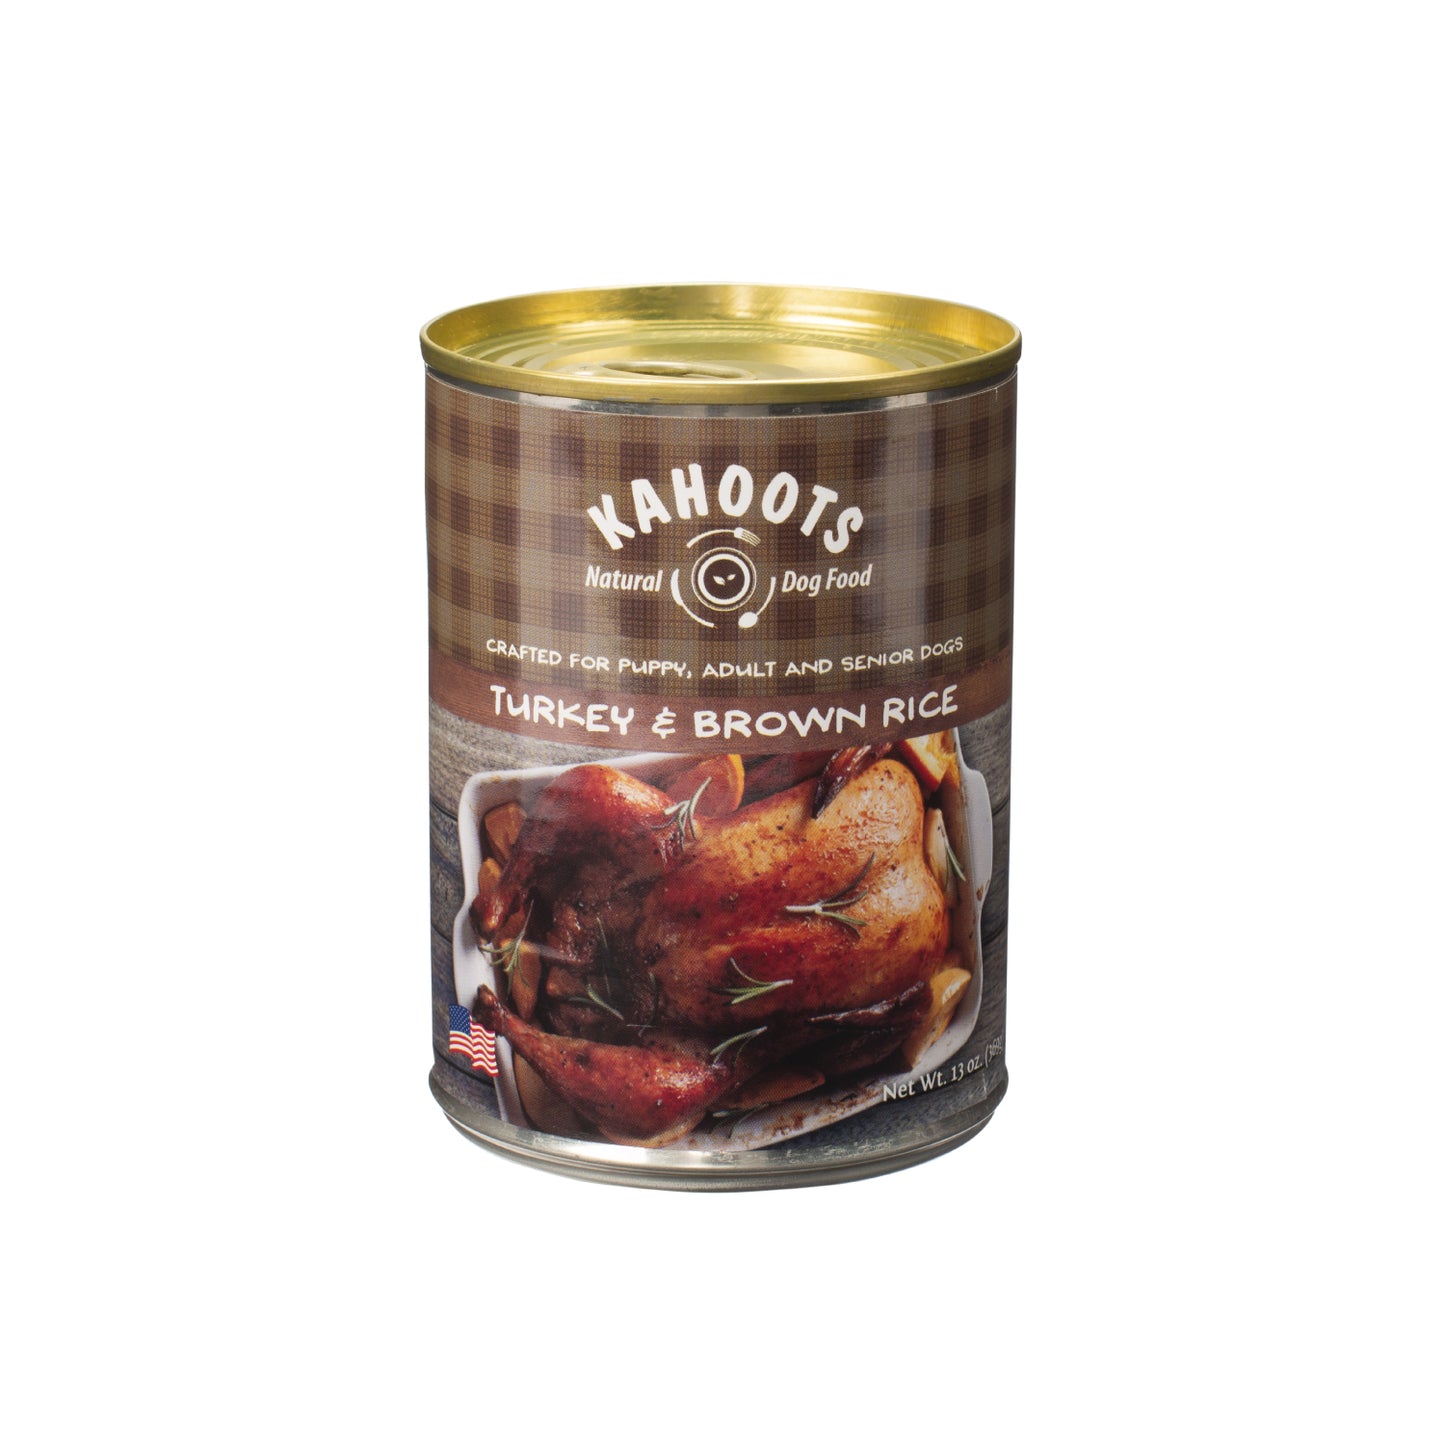 Turkey and brown rice wet dog food can. Picture of roasted turkey dinner over brown checked background on label